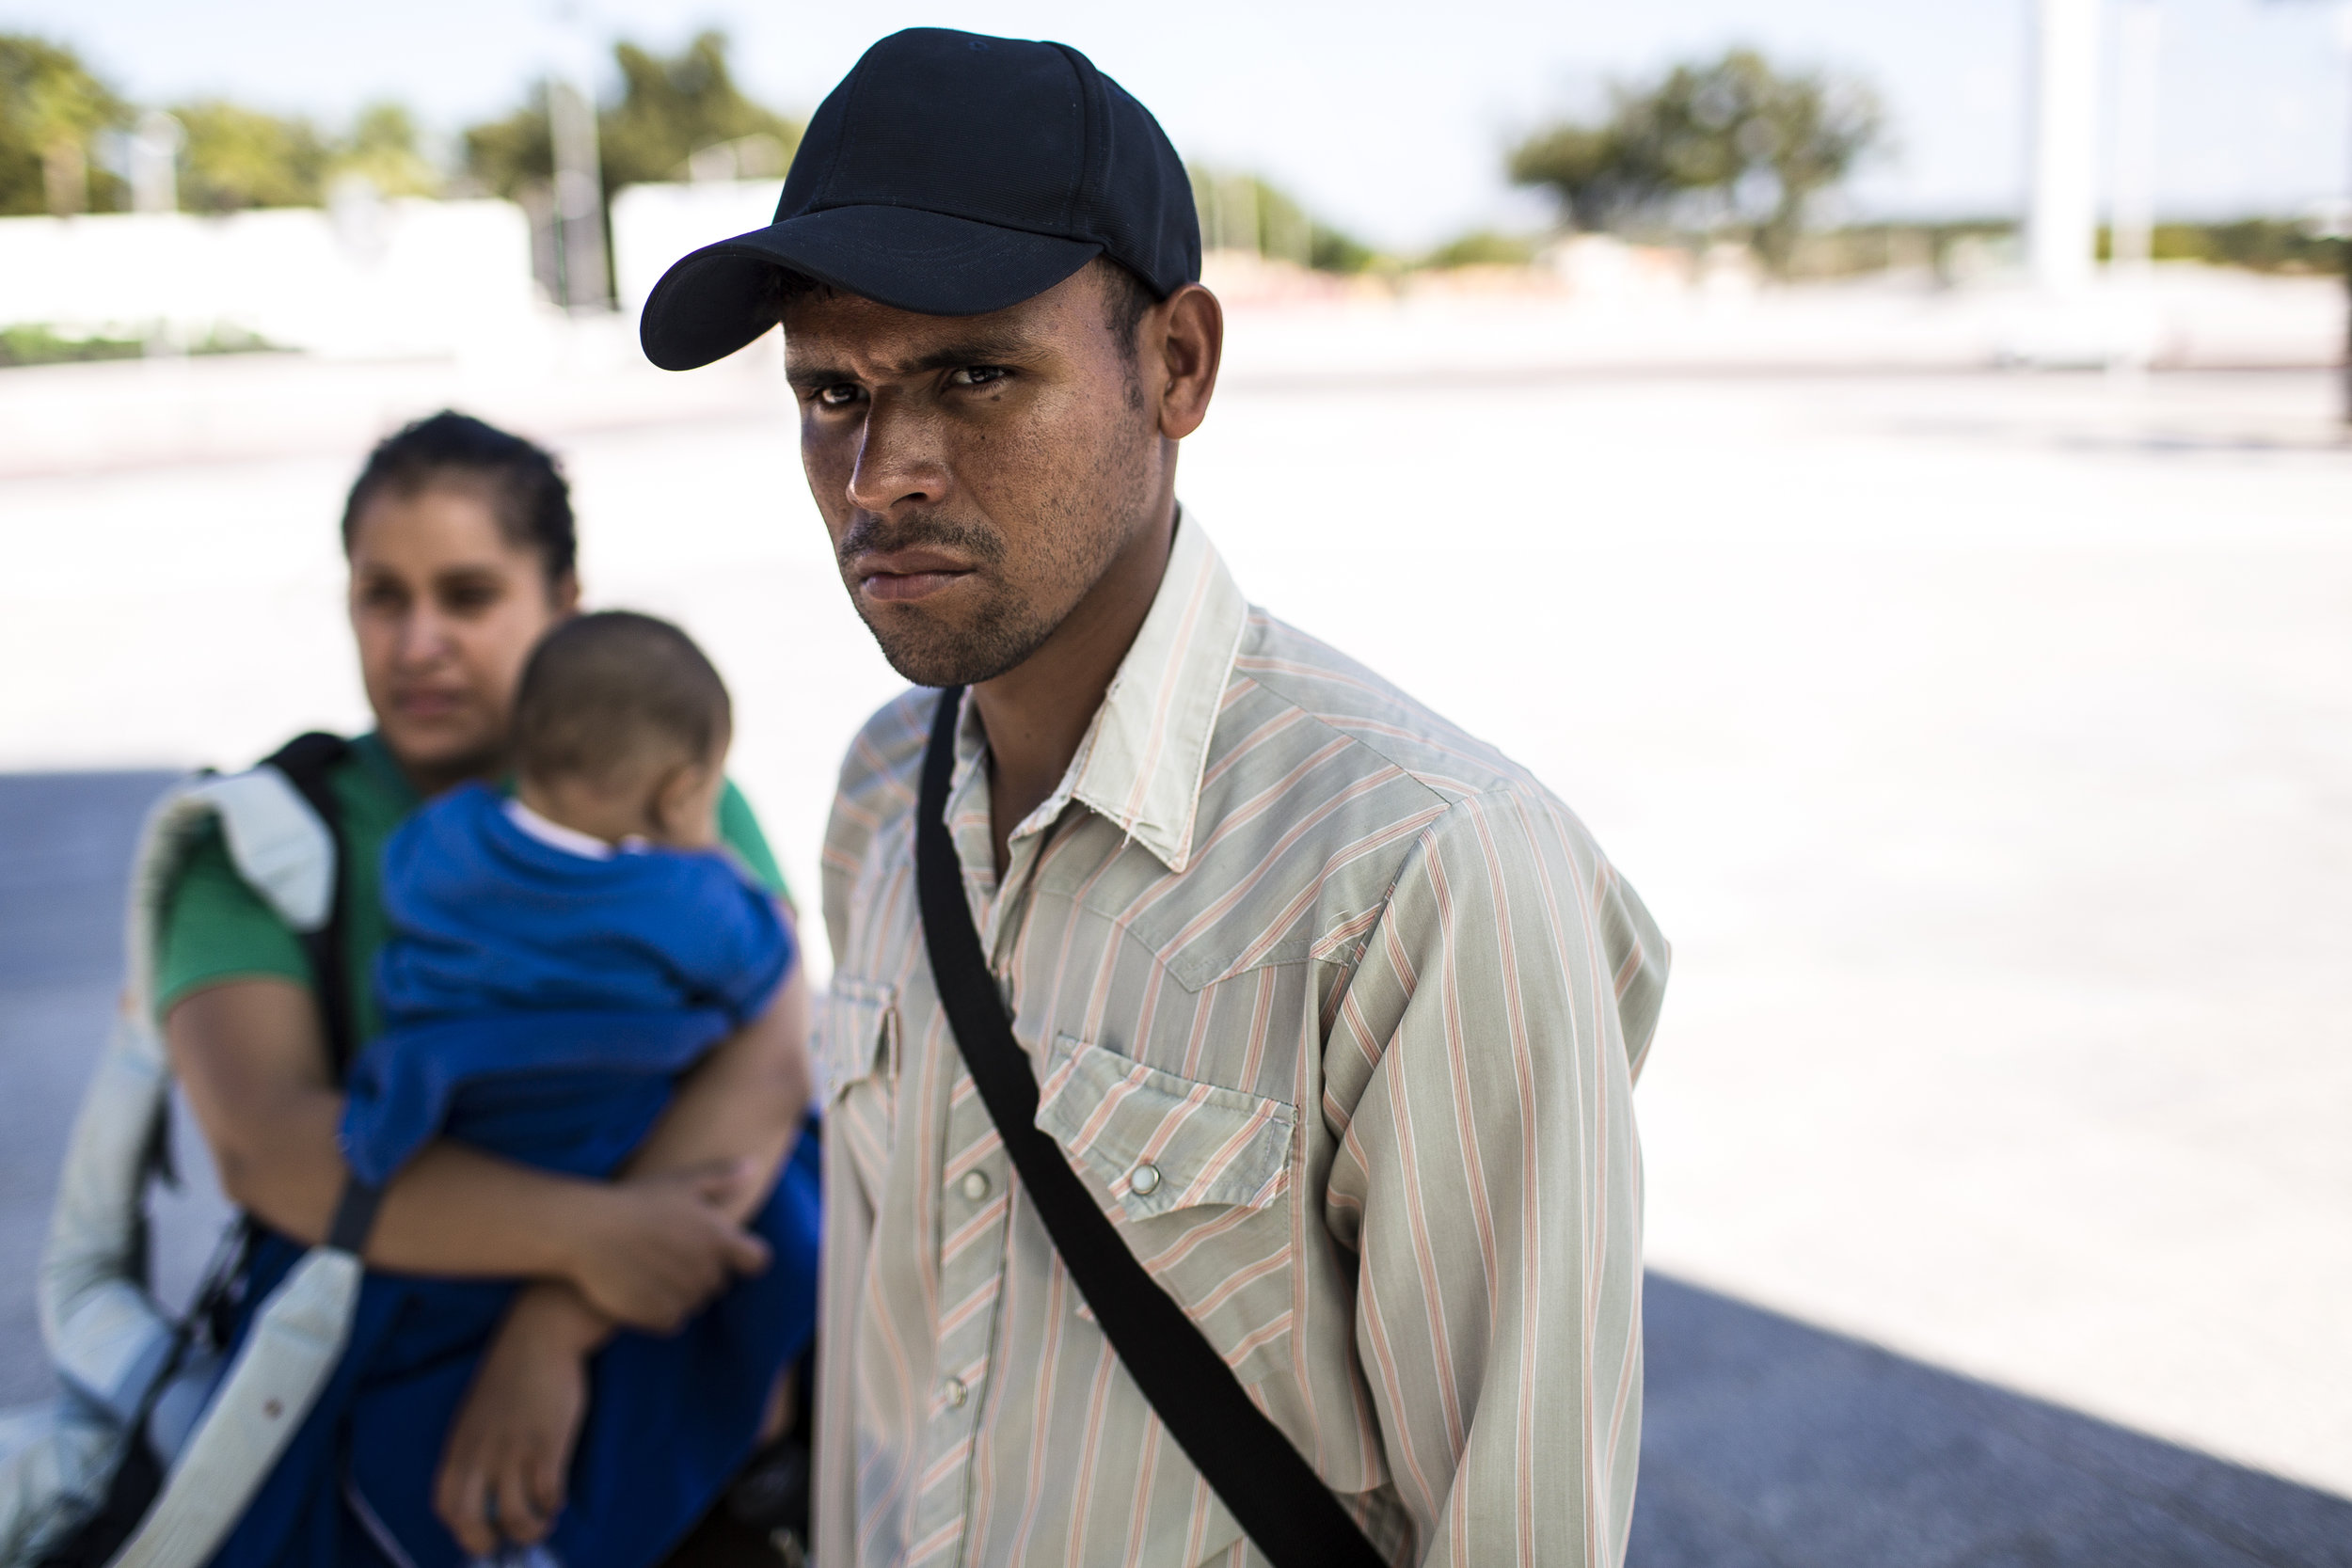  The Carias family leaves the US-Mexico border overlook in Piedras Negras, Mexico, after spotting a group of young men that make them uneasy. They have heard about individual migrants and also families being abducted and held for ransom and Dikeni wa